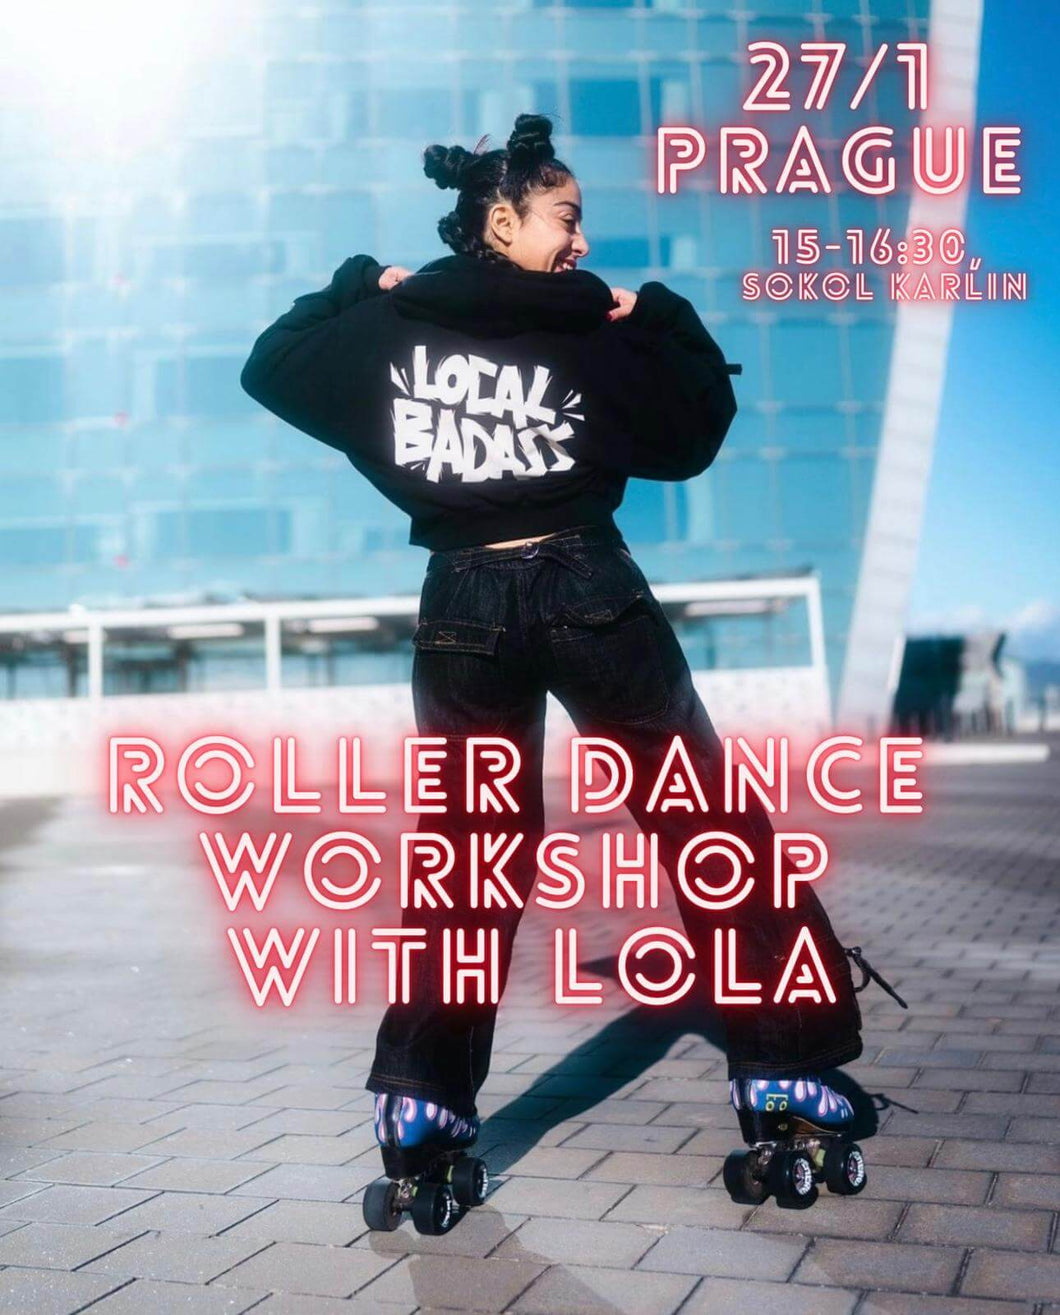 Roll With Lola - PRAGUE 27 of January 15:00 -16:30